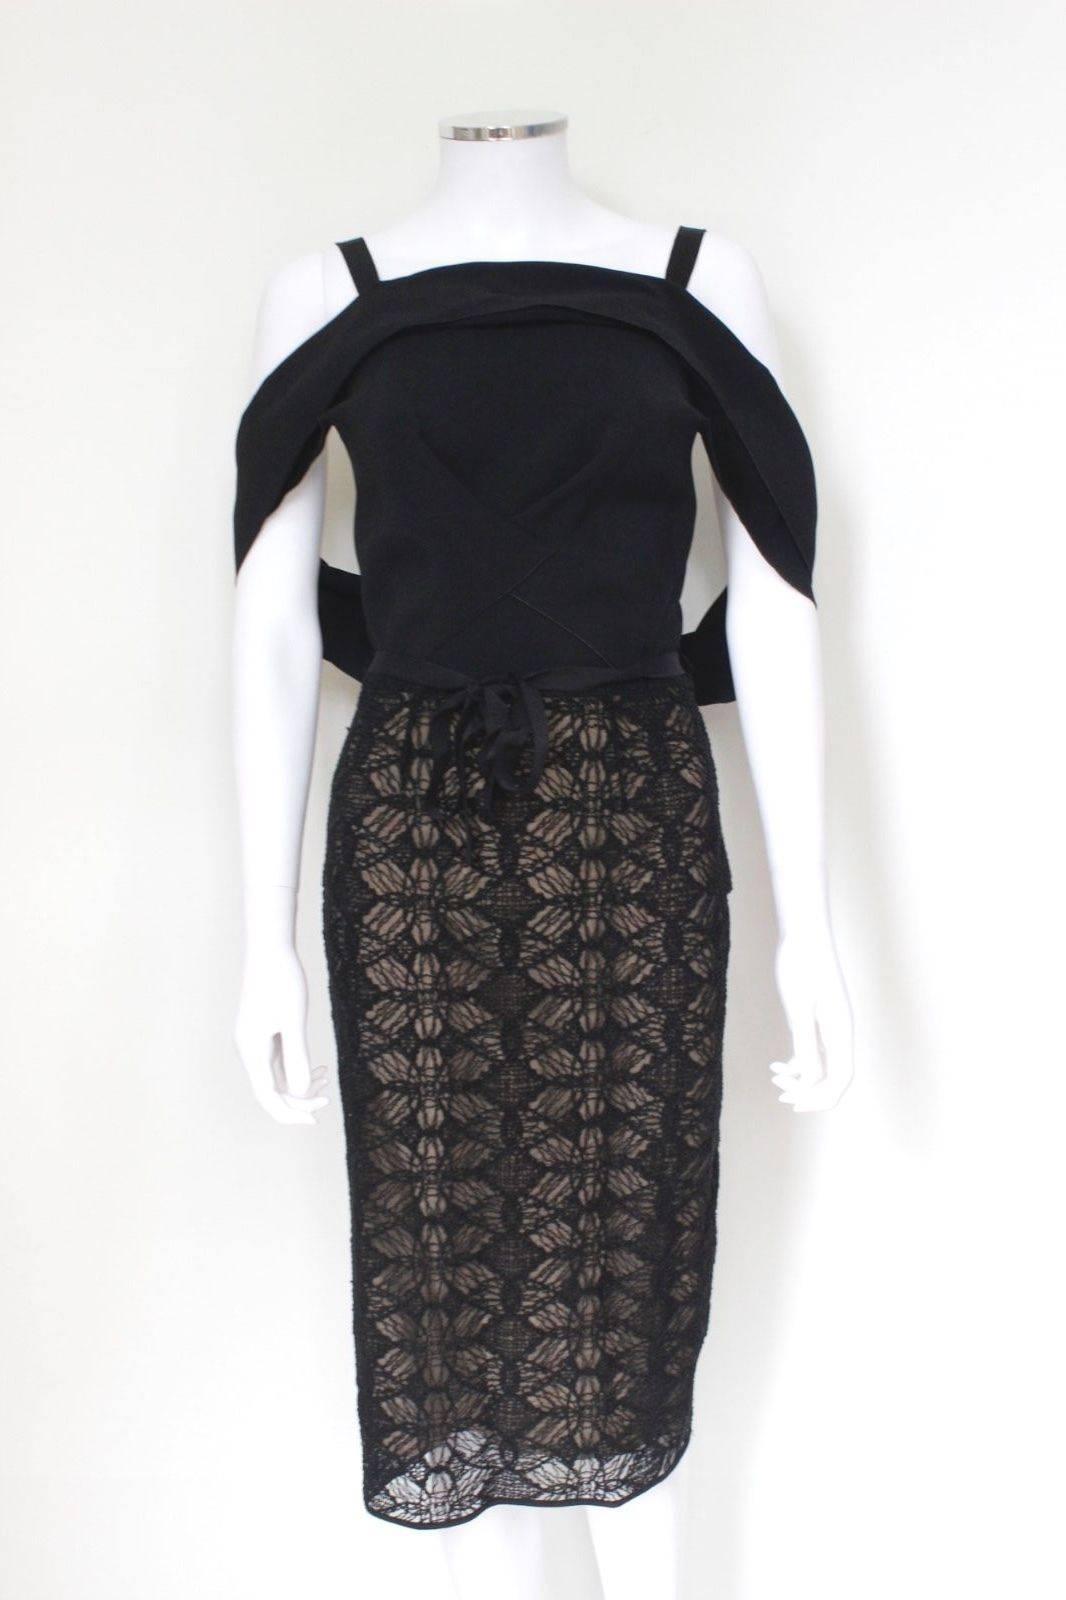 £1550 Roland Mouret Avalon Lace 3 Way Dress UK 10 
Cotton-blend and embroidered lace dress from Roland Mouret's resort 2013 collection
Can be worn 3 ways, with the arms under or over the cape style shoulders 
Cowl neckline leads into a V-back with